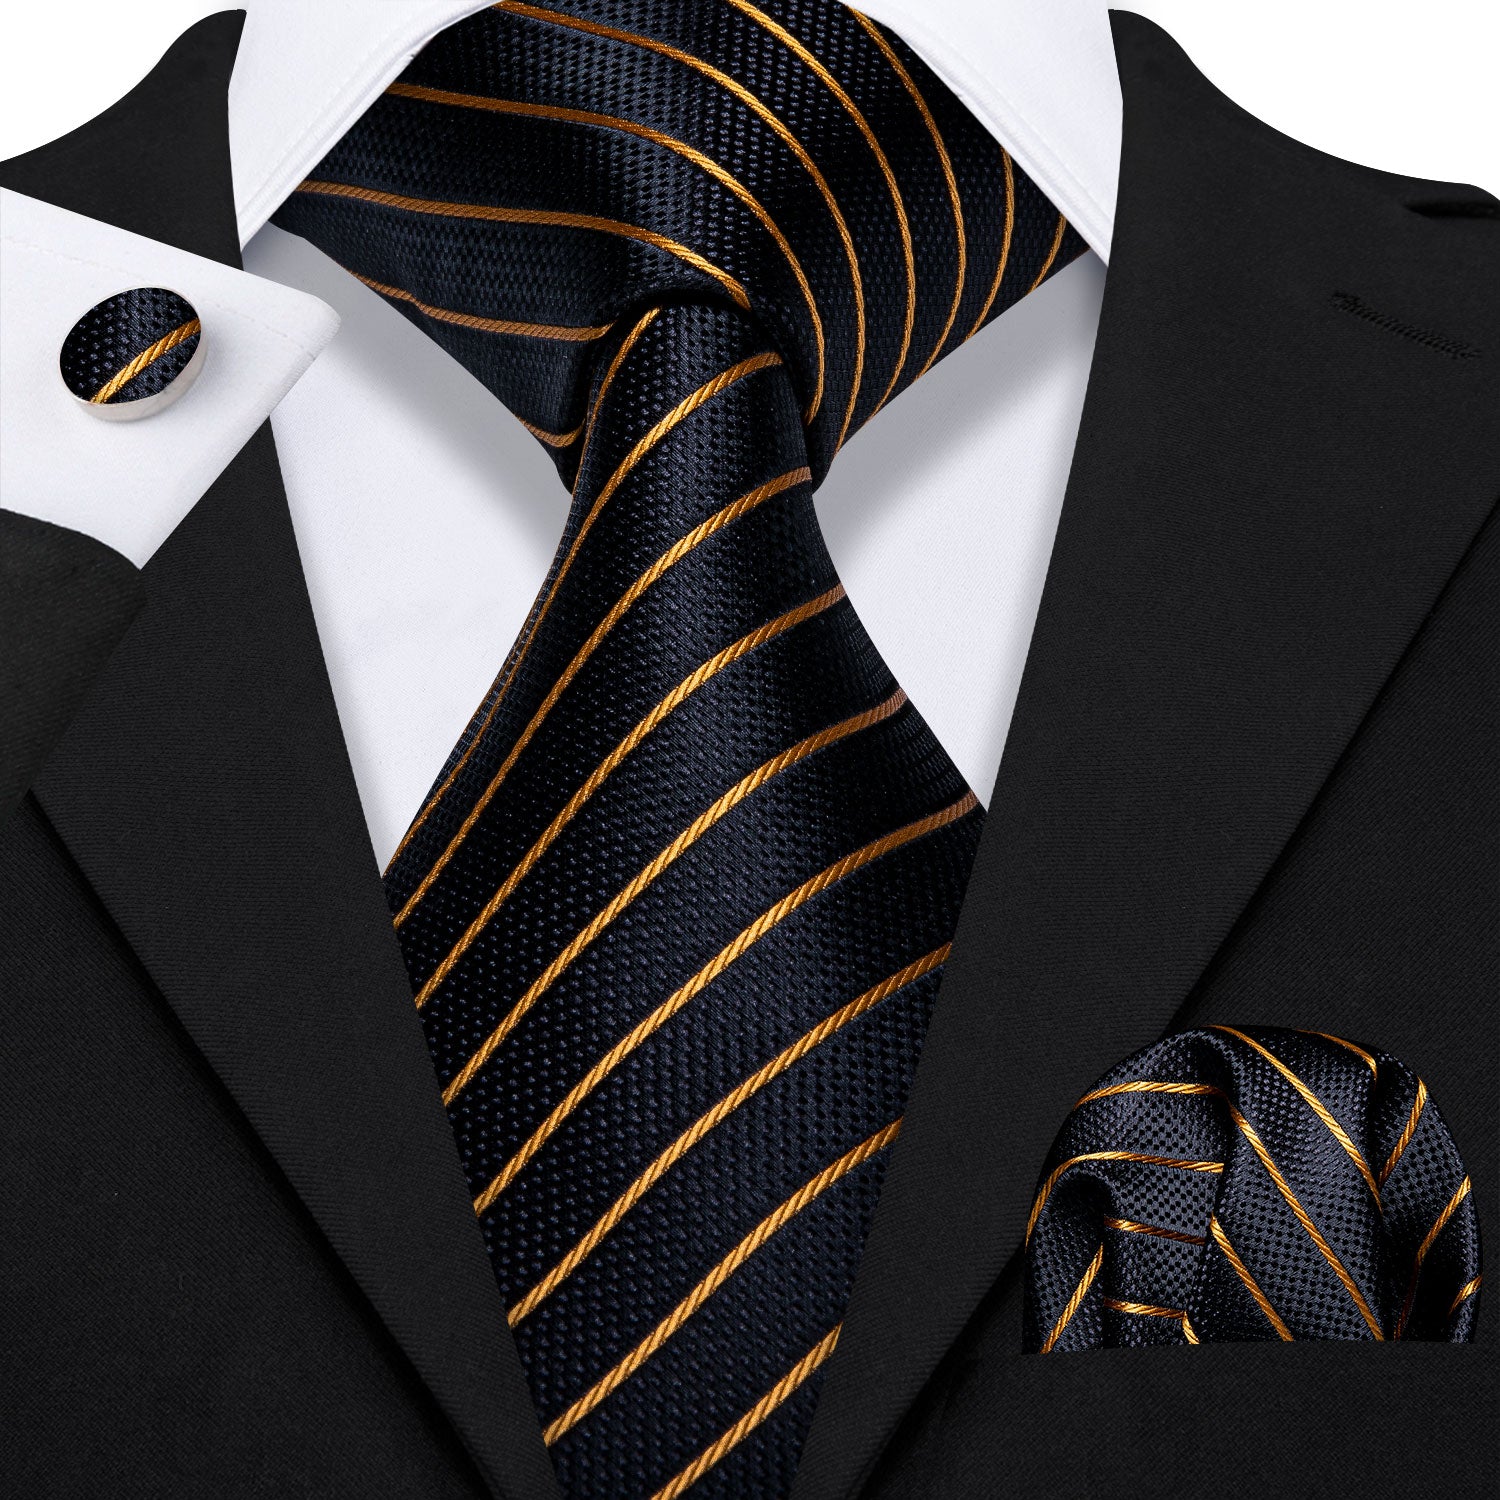 Barry.wang Black Tie Gold Stripe Men's Silk Tie Pocket Square Cufflinks Set with Brooches